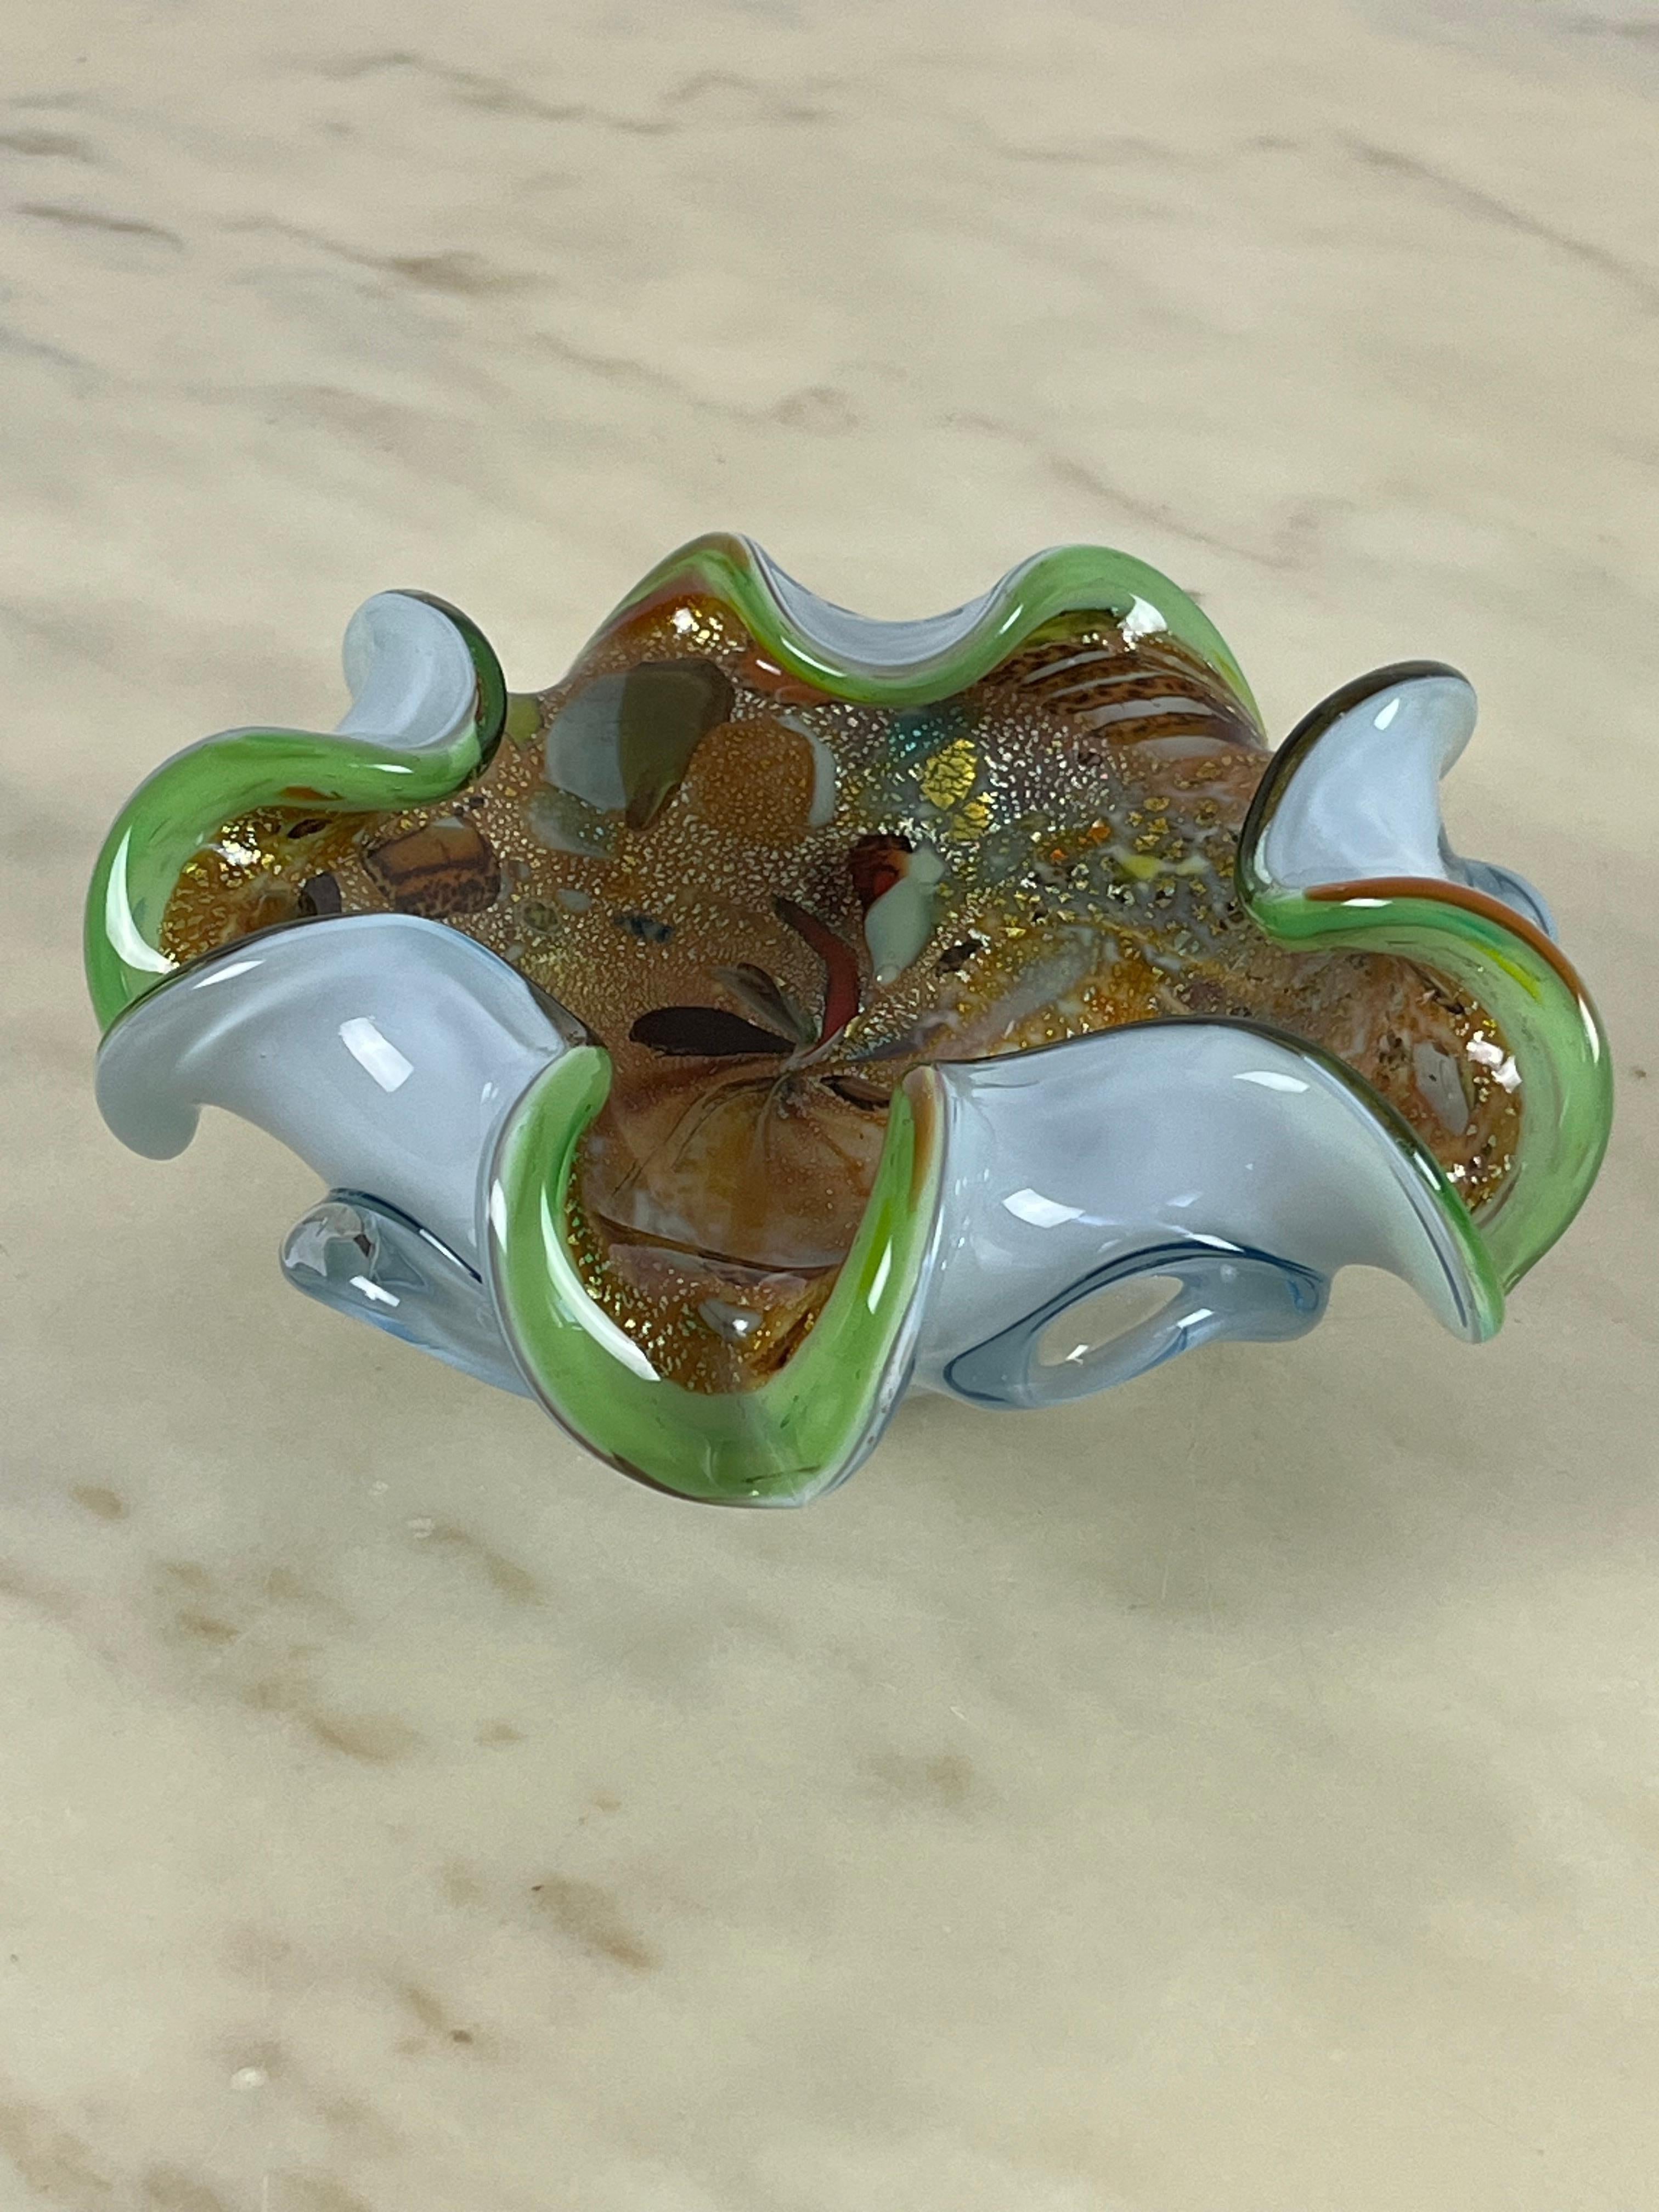 Colored Murano glass ashtray/pocket tray, Italy, 1970s
Found in a noble apartment, it is intact and in excellent condition.